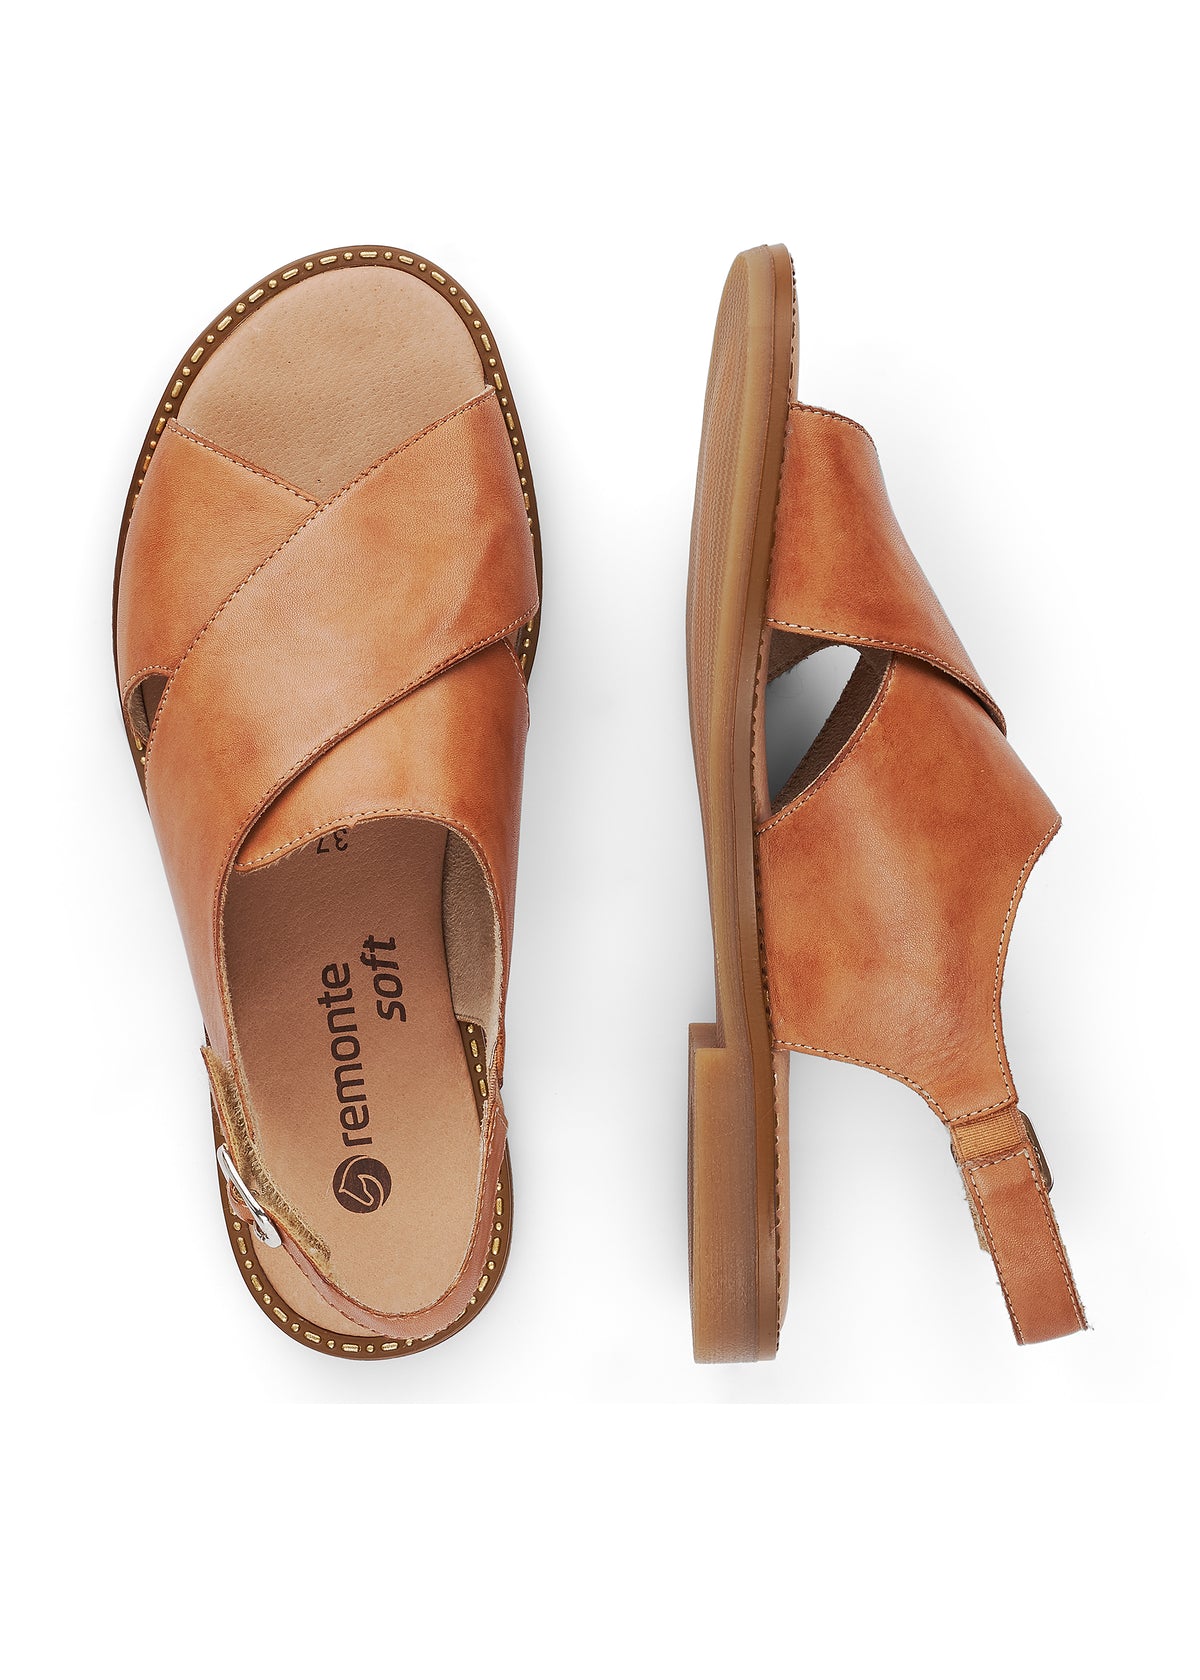 Low sandals with wide straps - brown